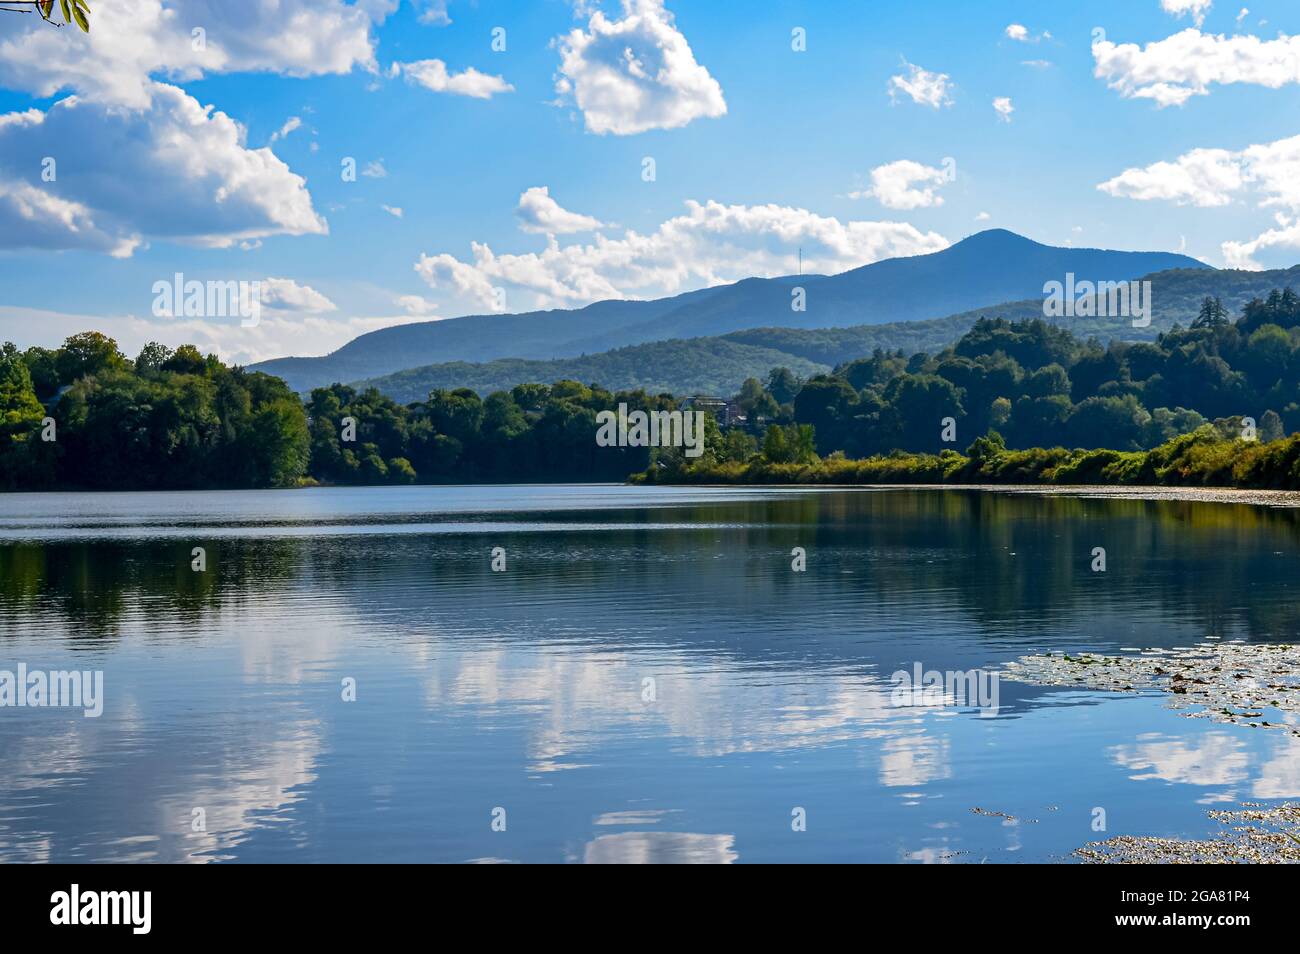 A summertime blue sky and mountain view are reflected in a lake in Vermont, USA. Copy space. Stock Photo